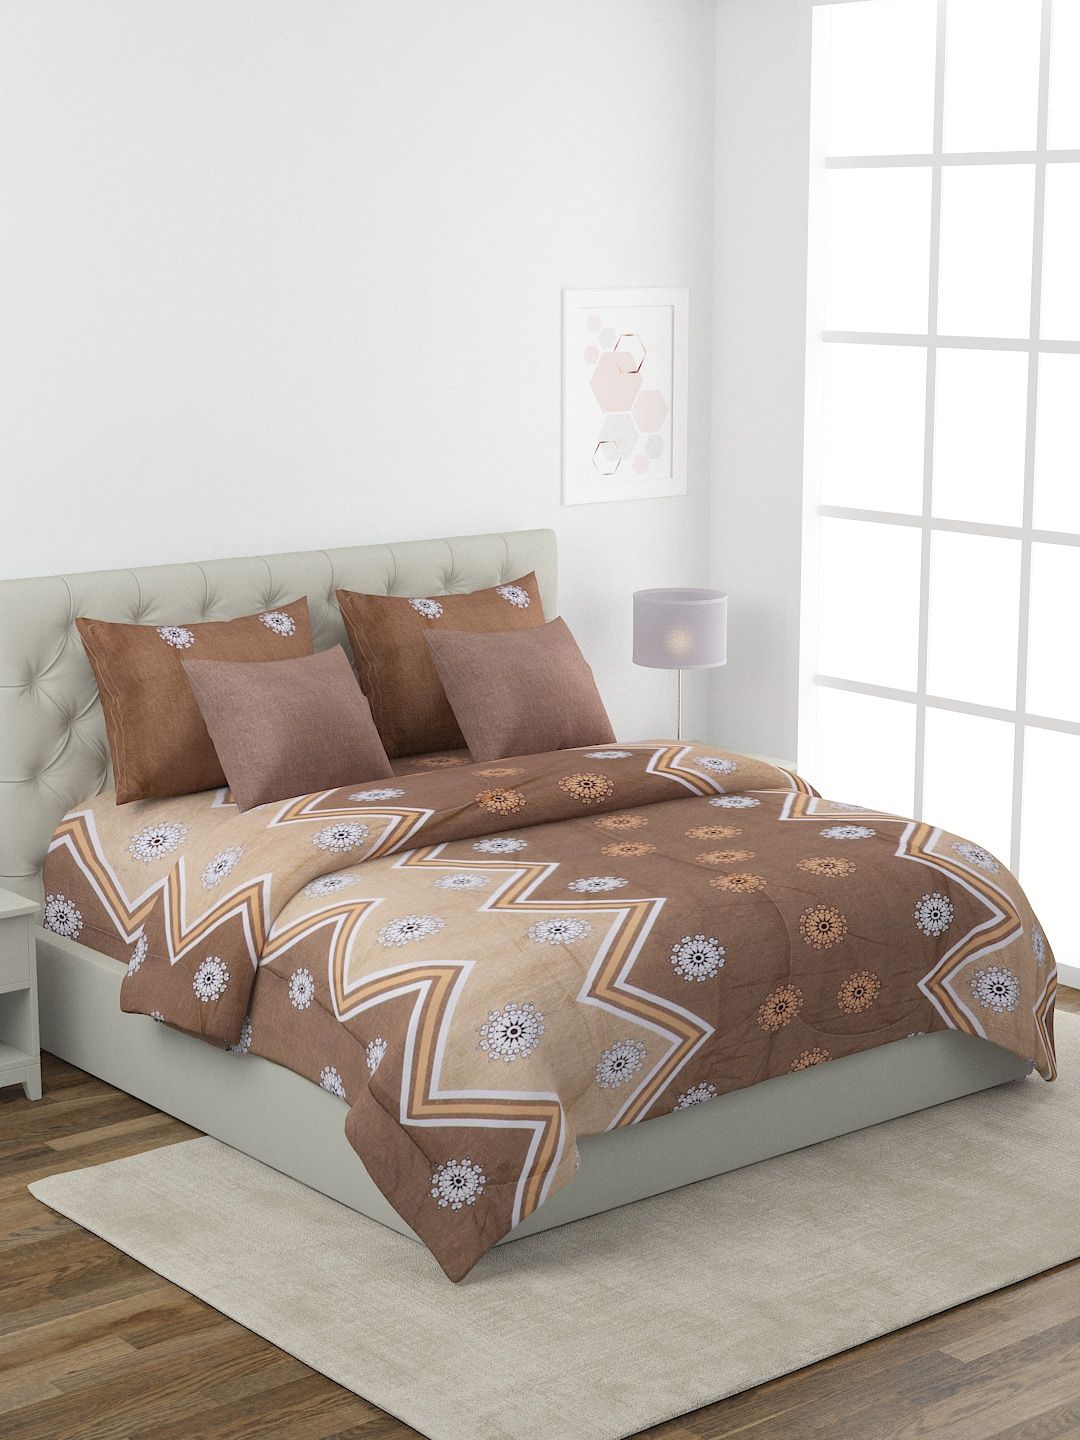 ROMEE Brown & Beige Printed Pure Cotton Superfine Double King Bedding Set Price in India